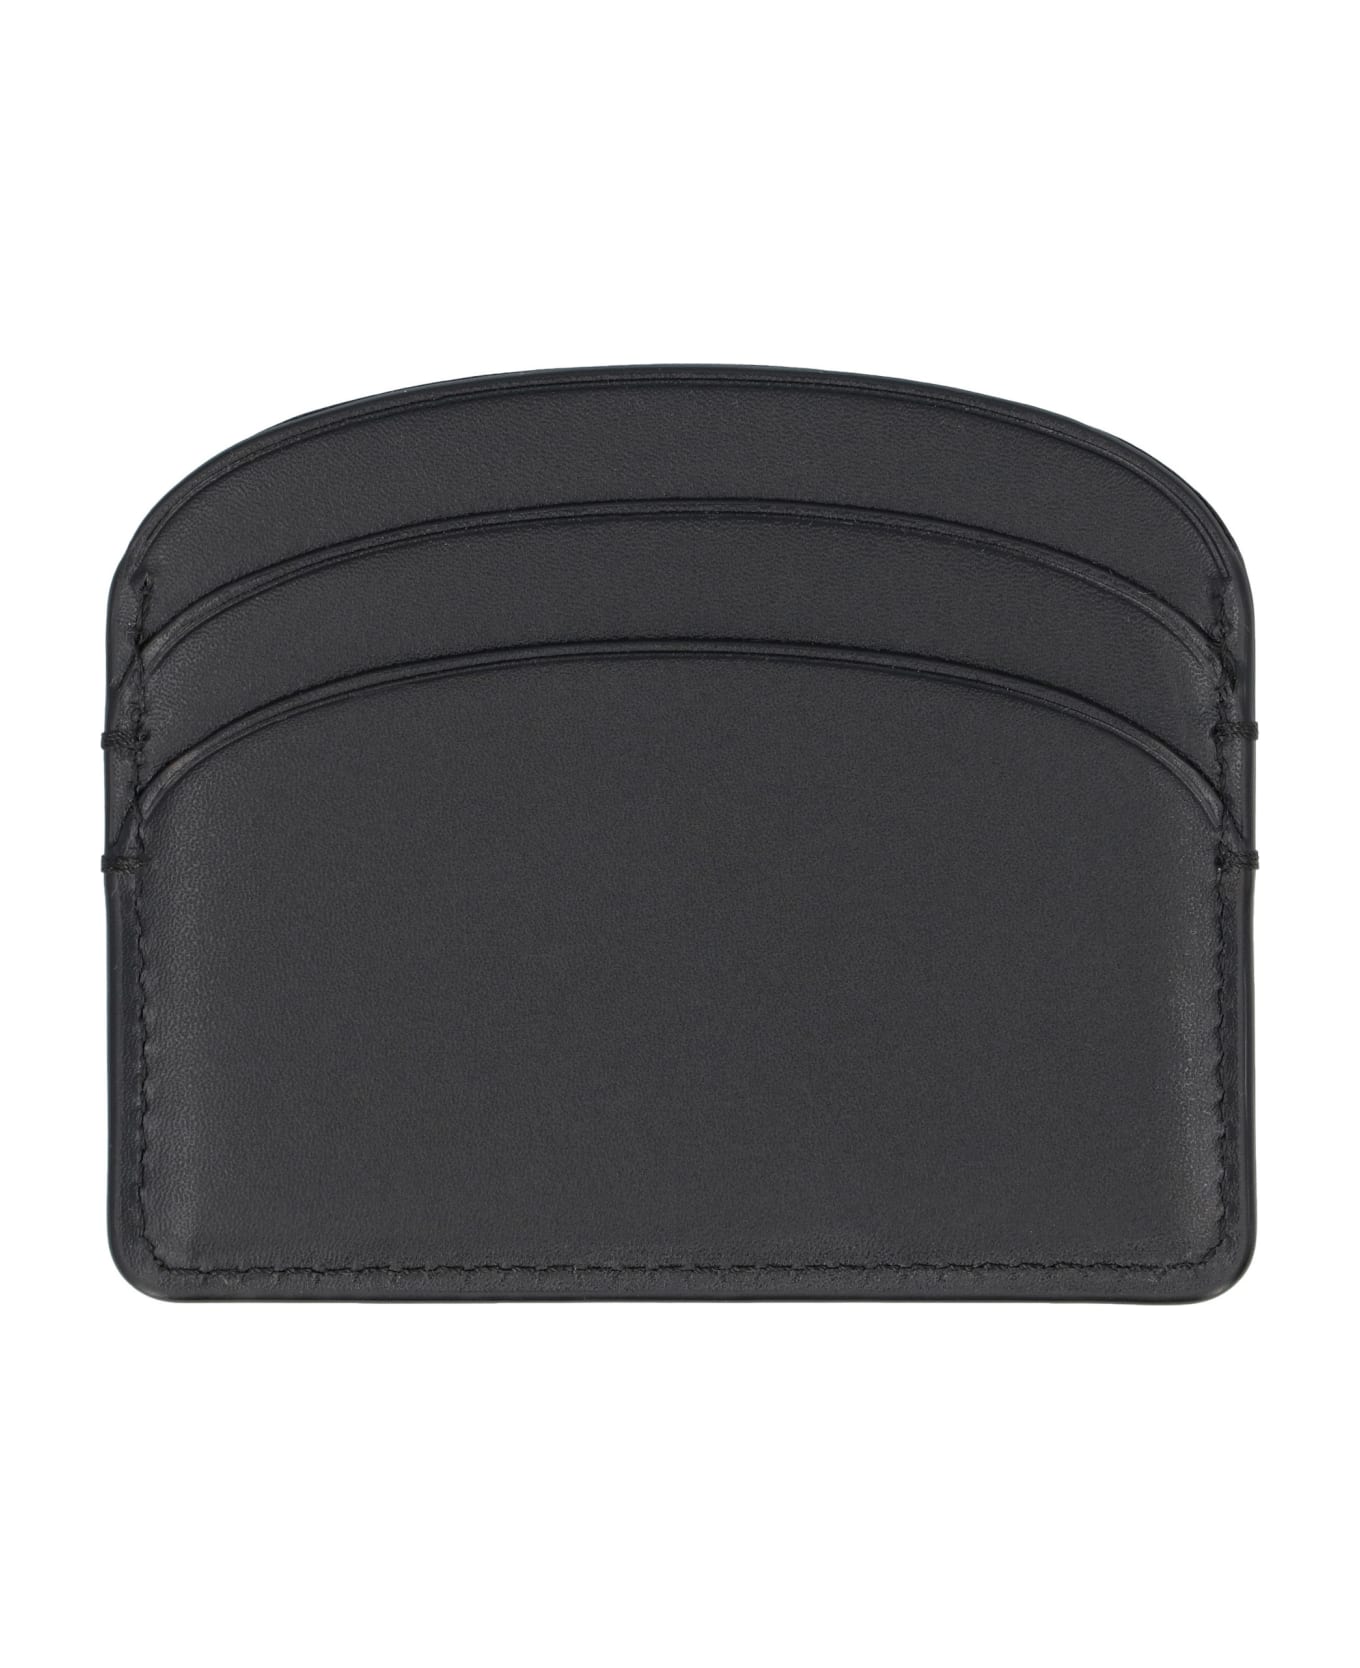 A.P.C. Lune Leather Card Holder - black